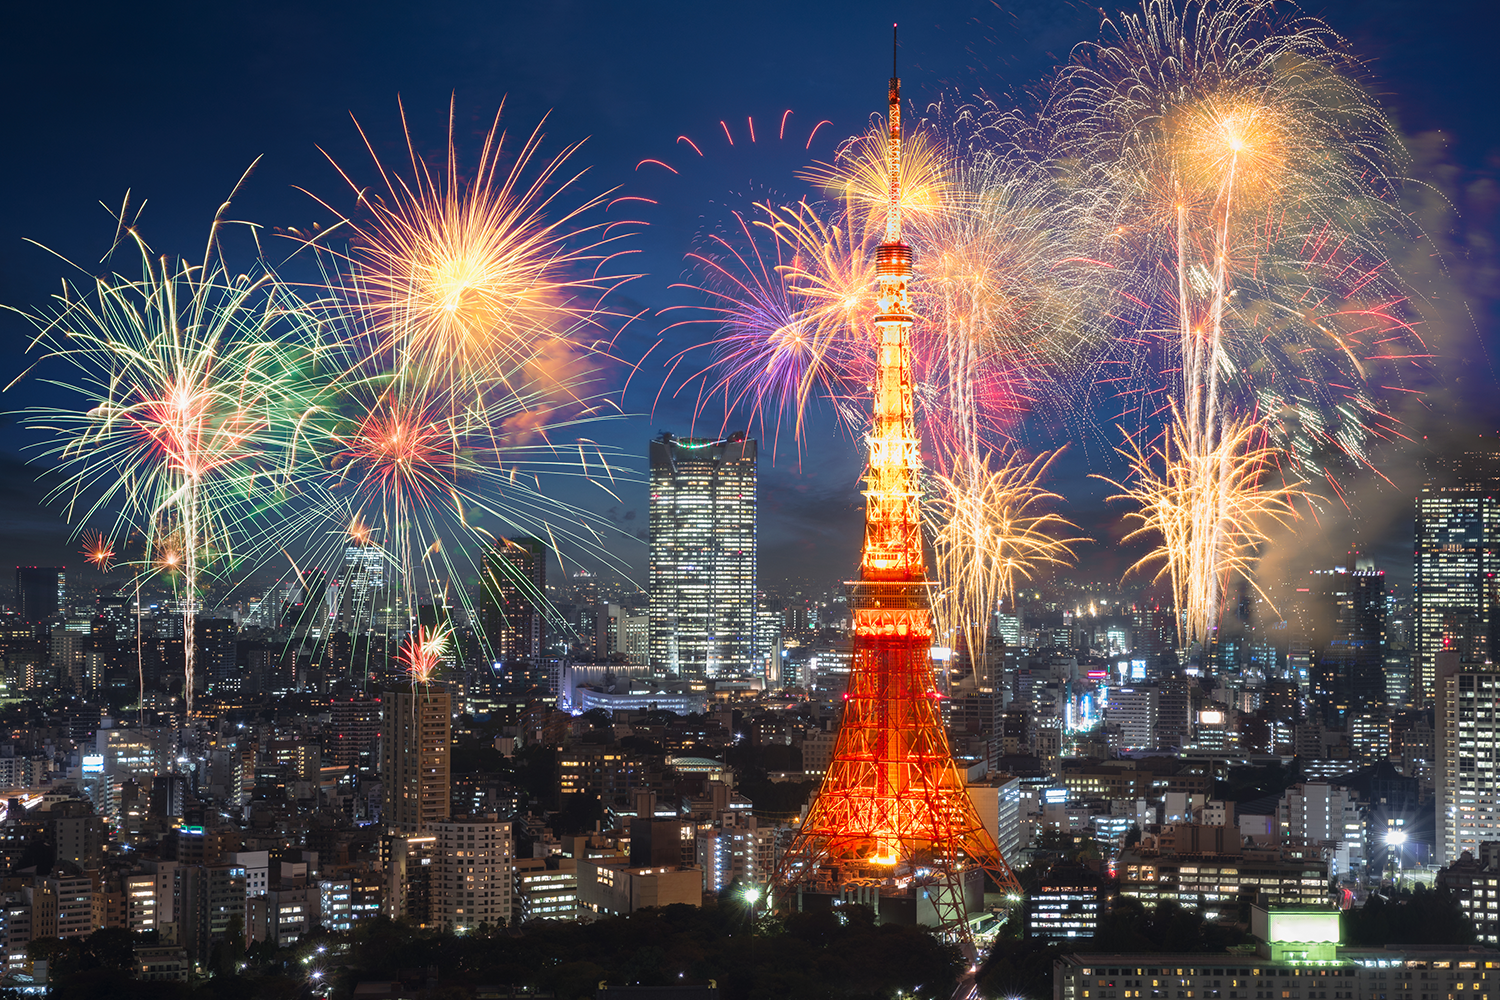 Fireworks light up against a Tokyo skyline, with Tokyo Tower lit up in red.